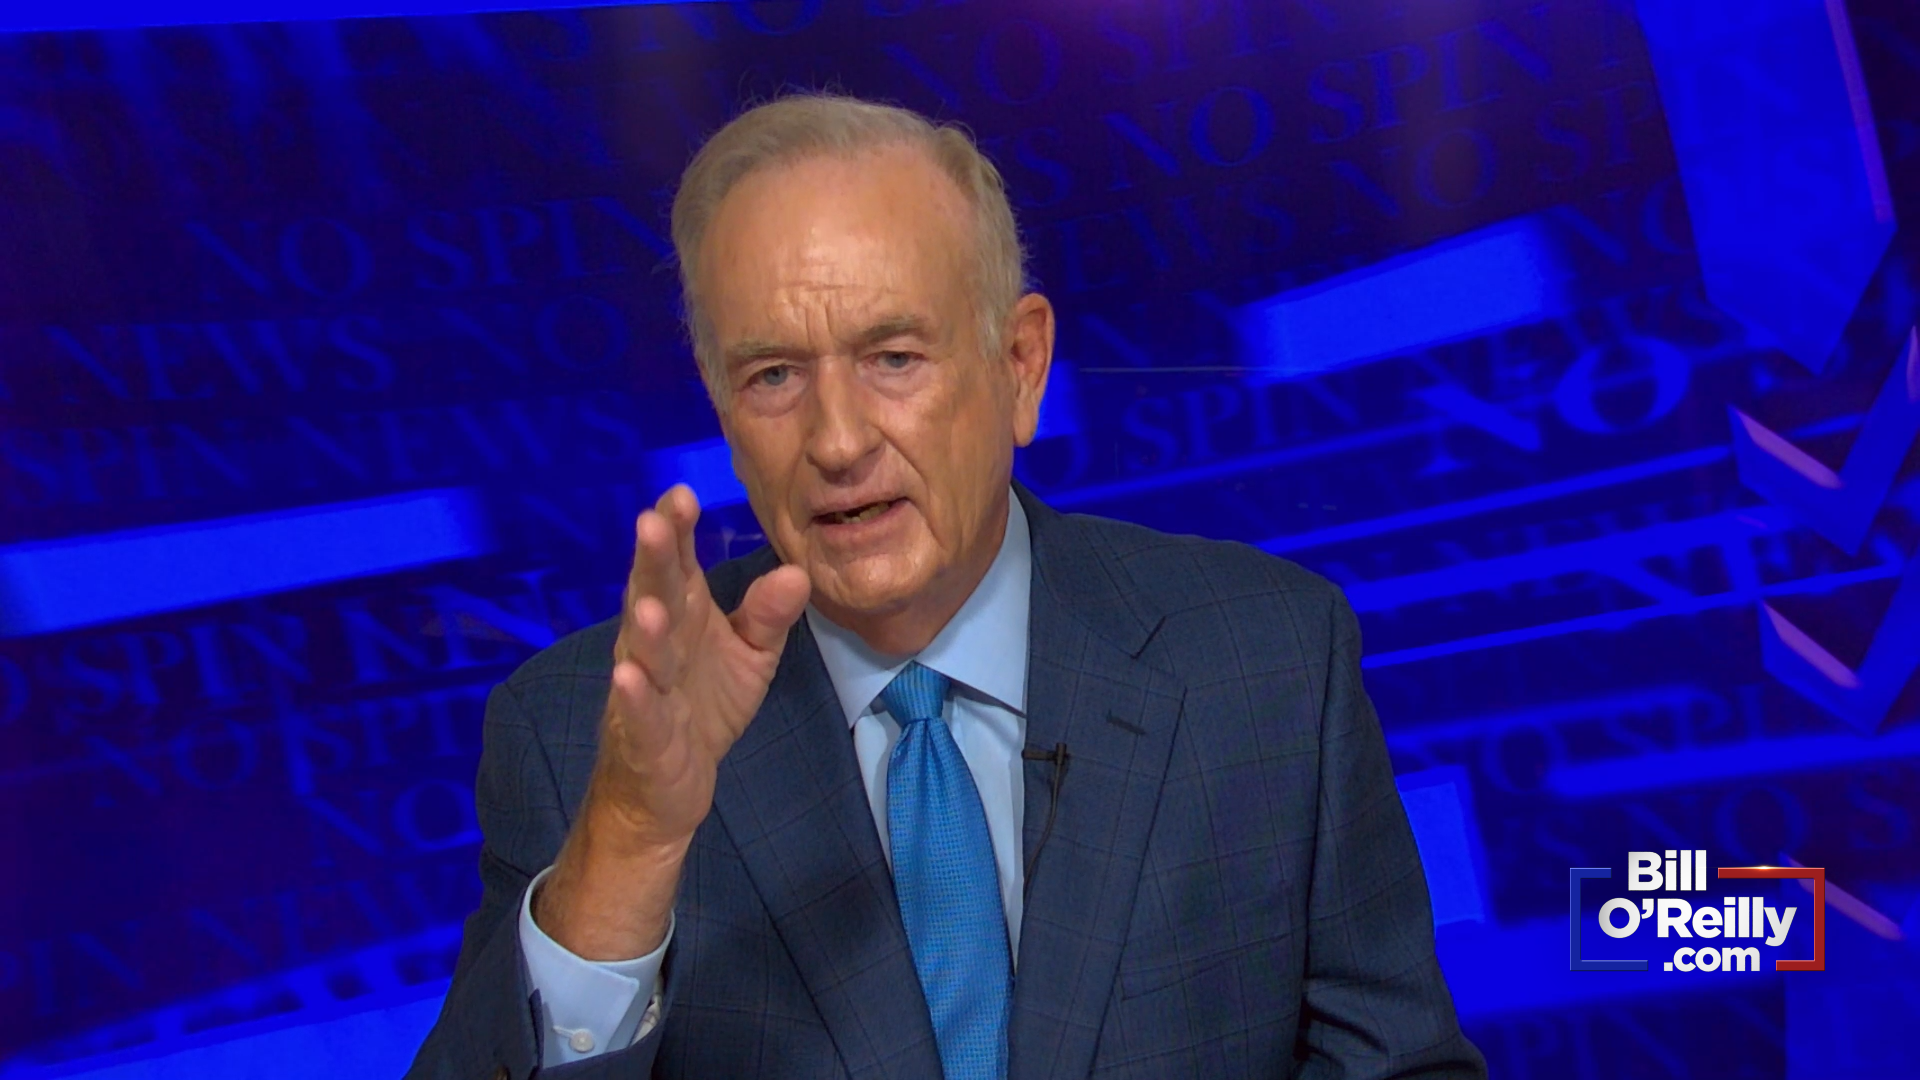 O'Reilly: 'We Will Go Bankrupt if Joe Biden is Re-Elected!'